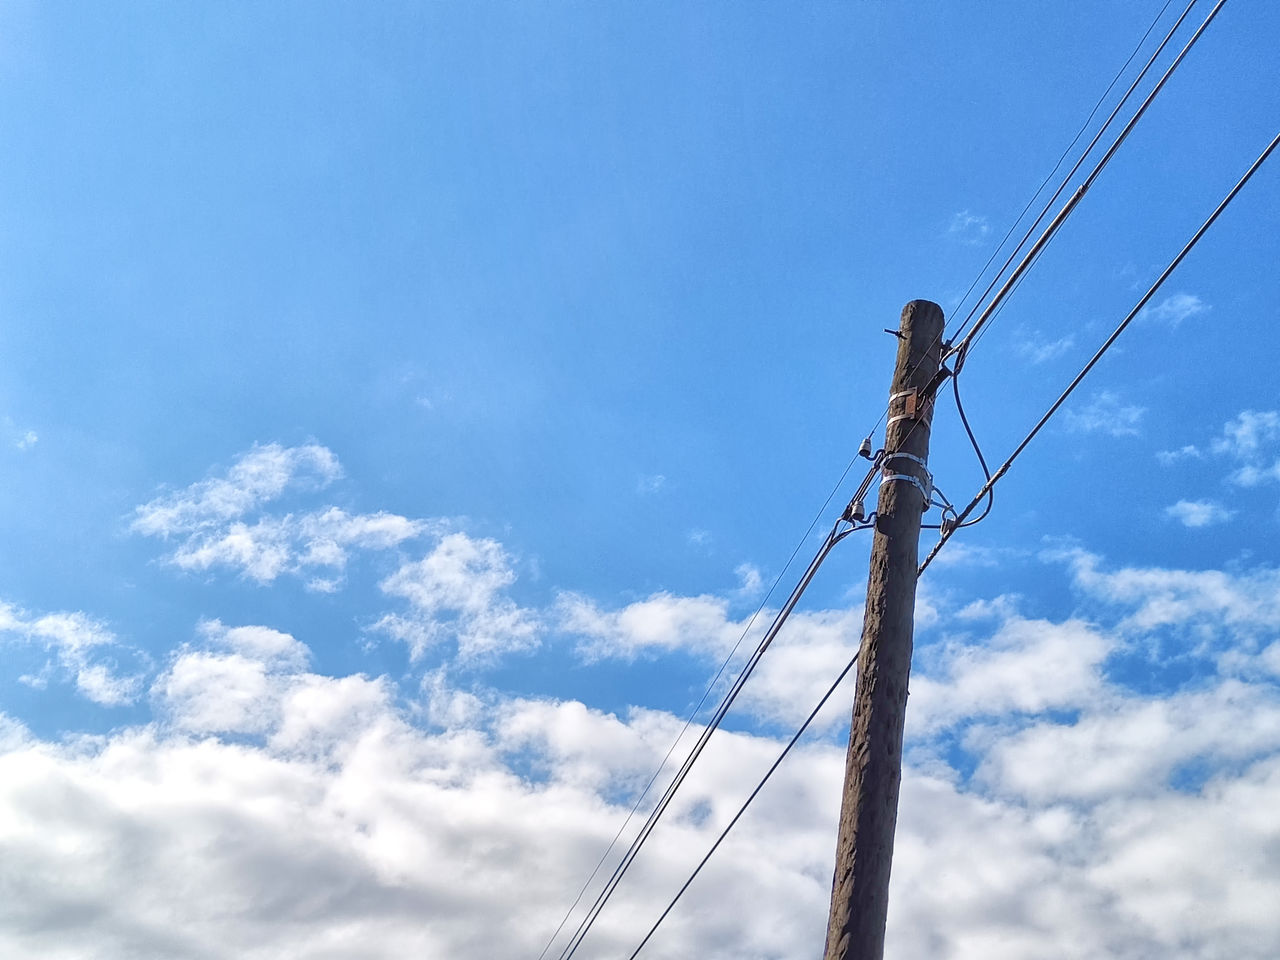 sky, cloud, blue, electricity, cable, low angle view, technology, overhead power line, nature, power supply, power generation, mast, day, wind, outdoors, power line, no people, telephone line, electricity pylon, telephone pole, pole, copy space, equipment